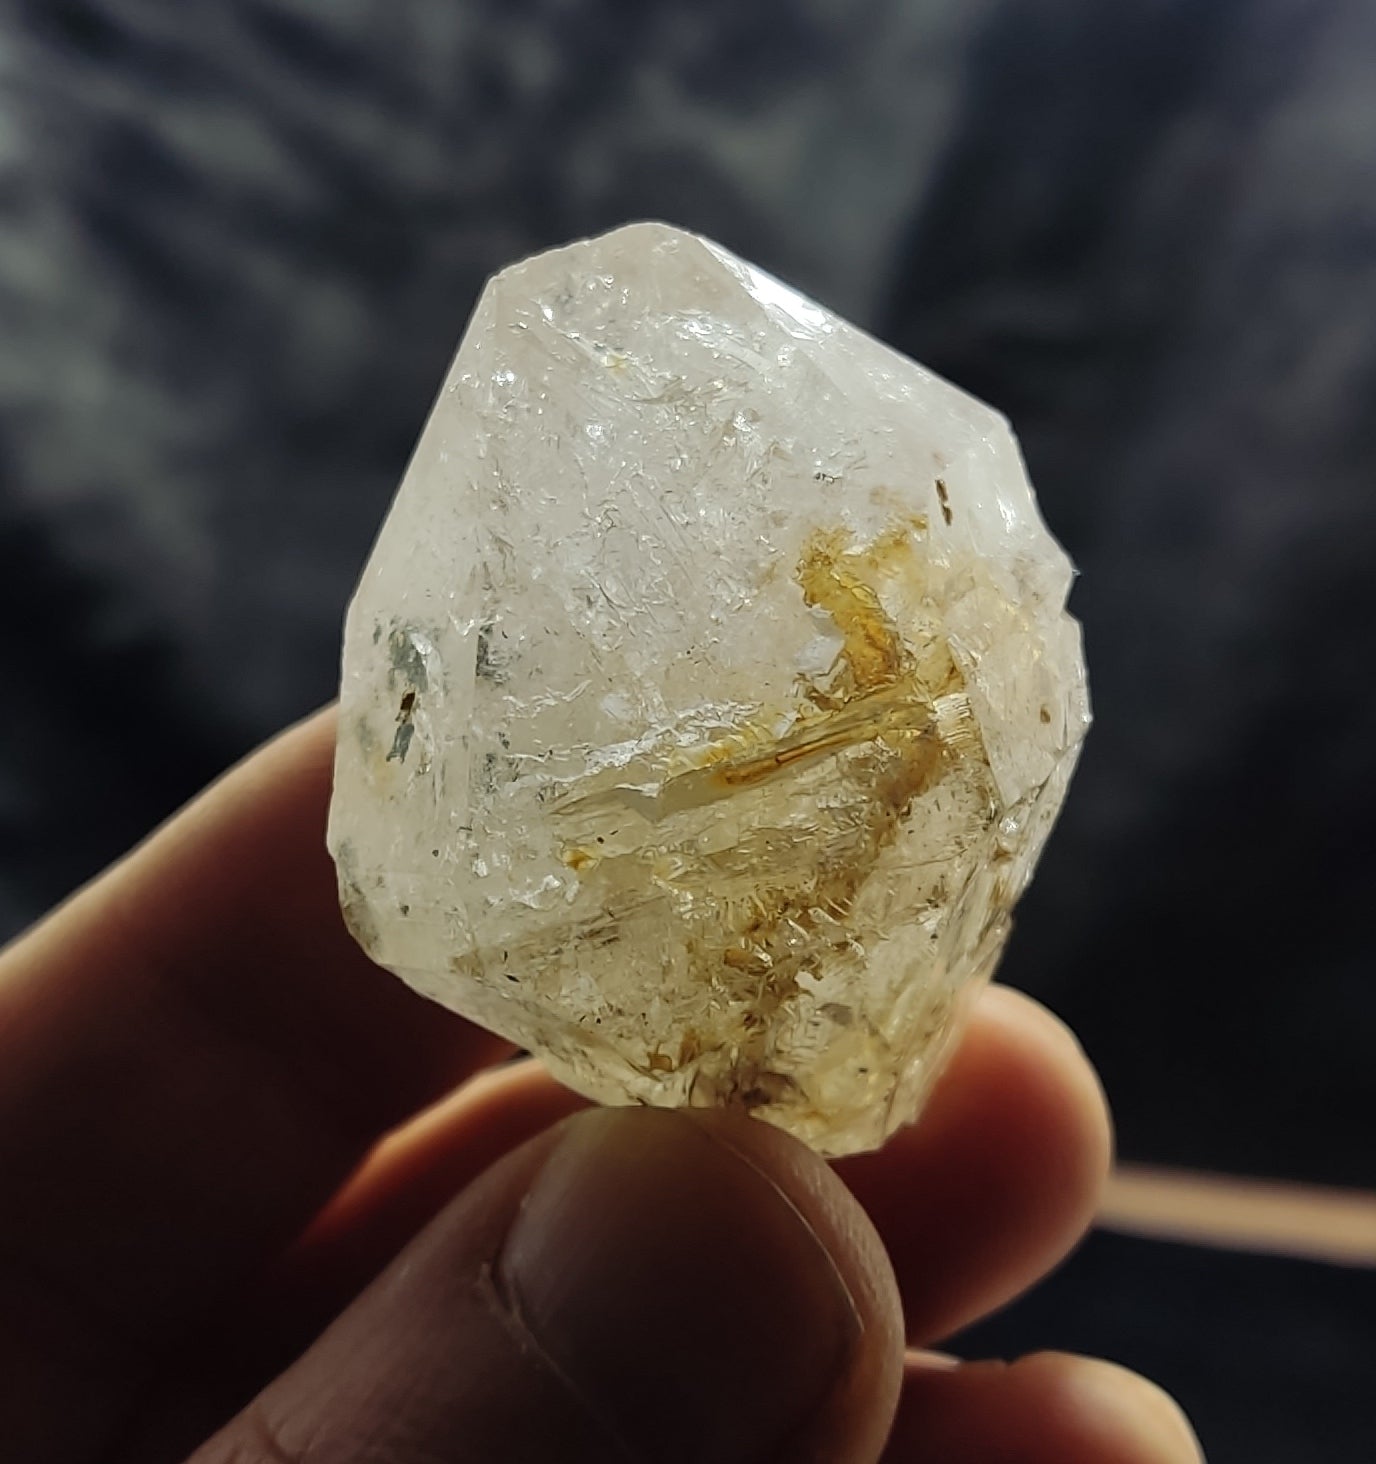 Fenster window Quartz Crystal with clay inclusions 42 grams